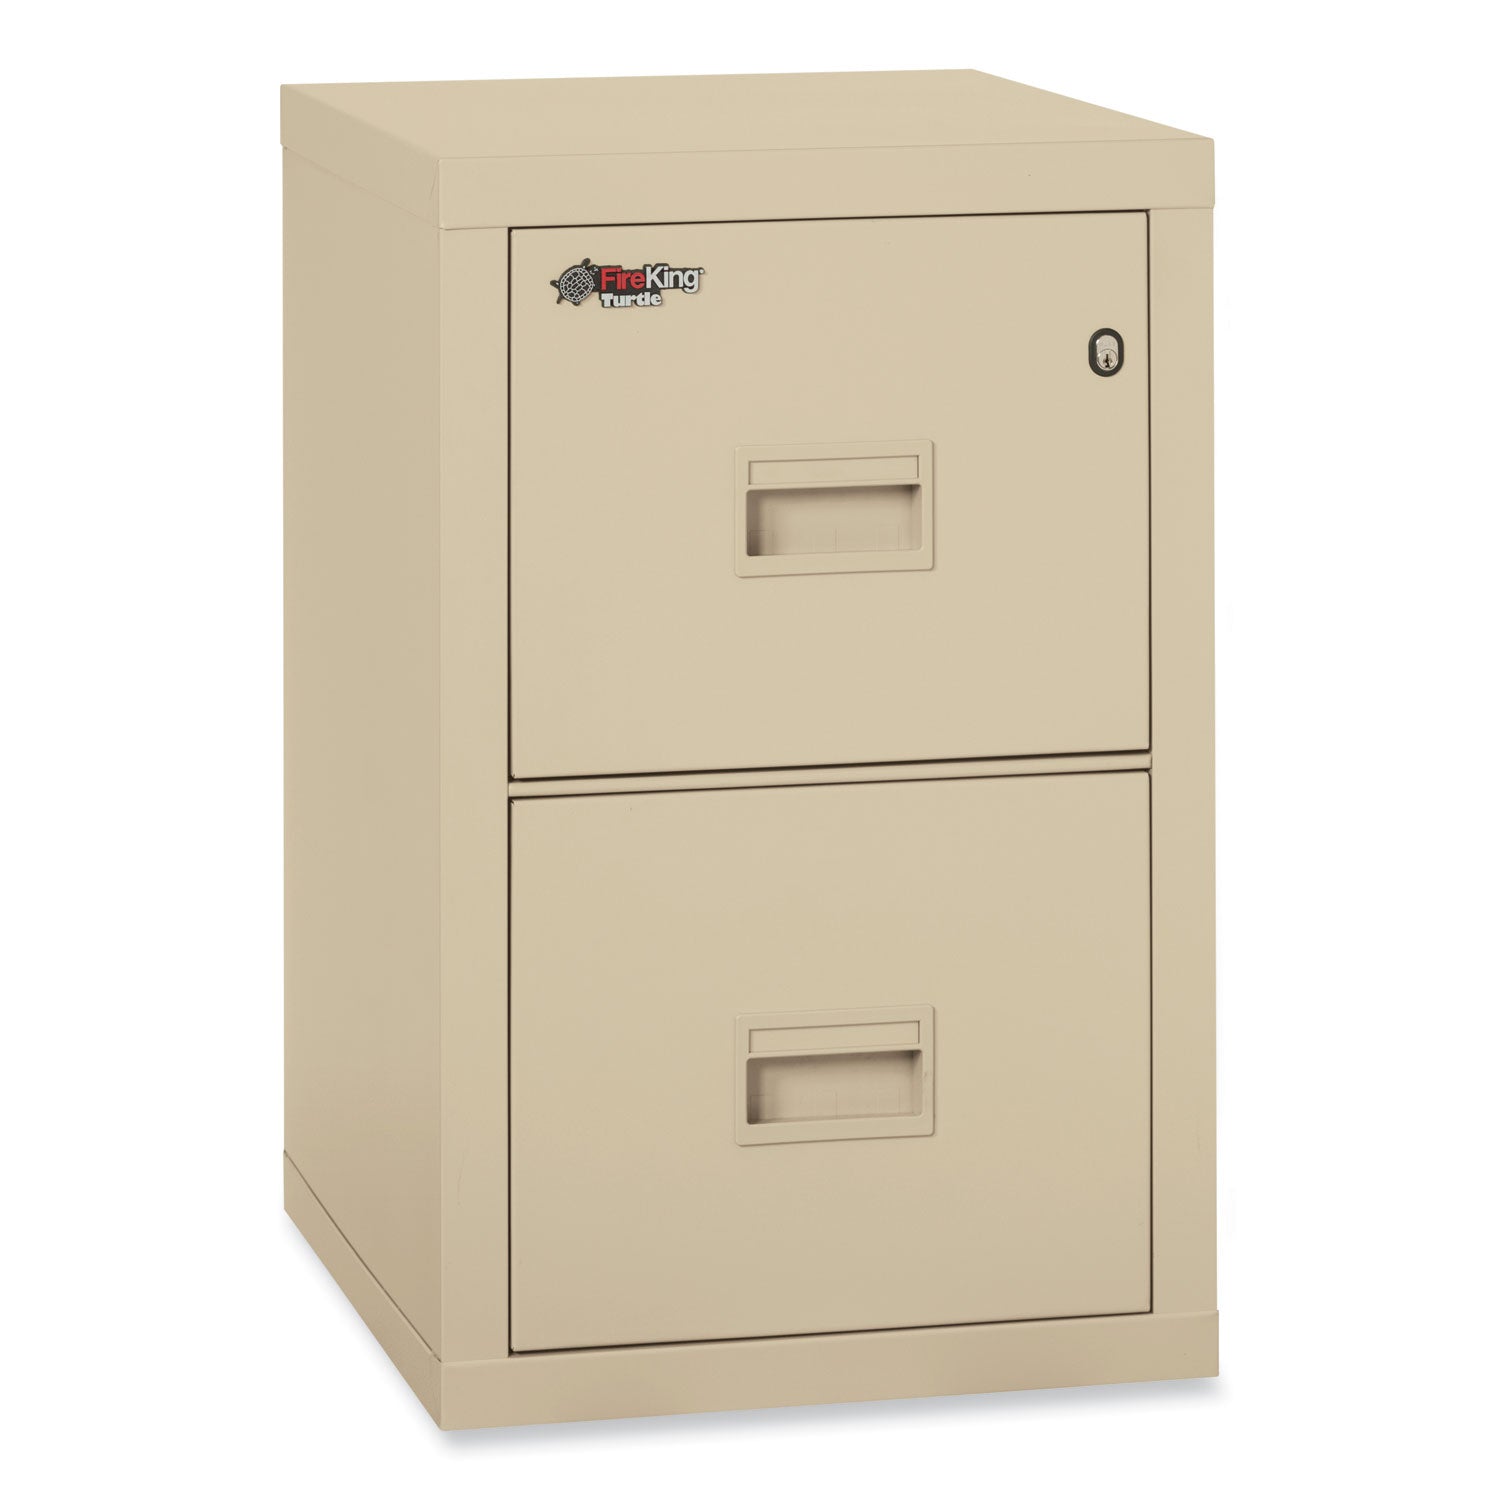 Compact Turtle Insulated Vertical File, 1-Hour Fire, 2 Legal/Letter File Drawers, Parchment, 17.75" x 22.13" x 27.75 - 